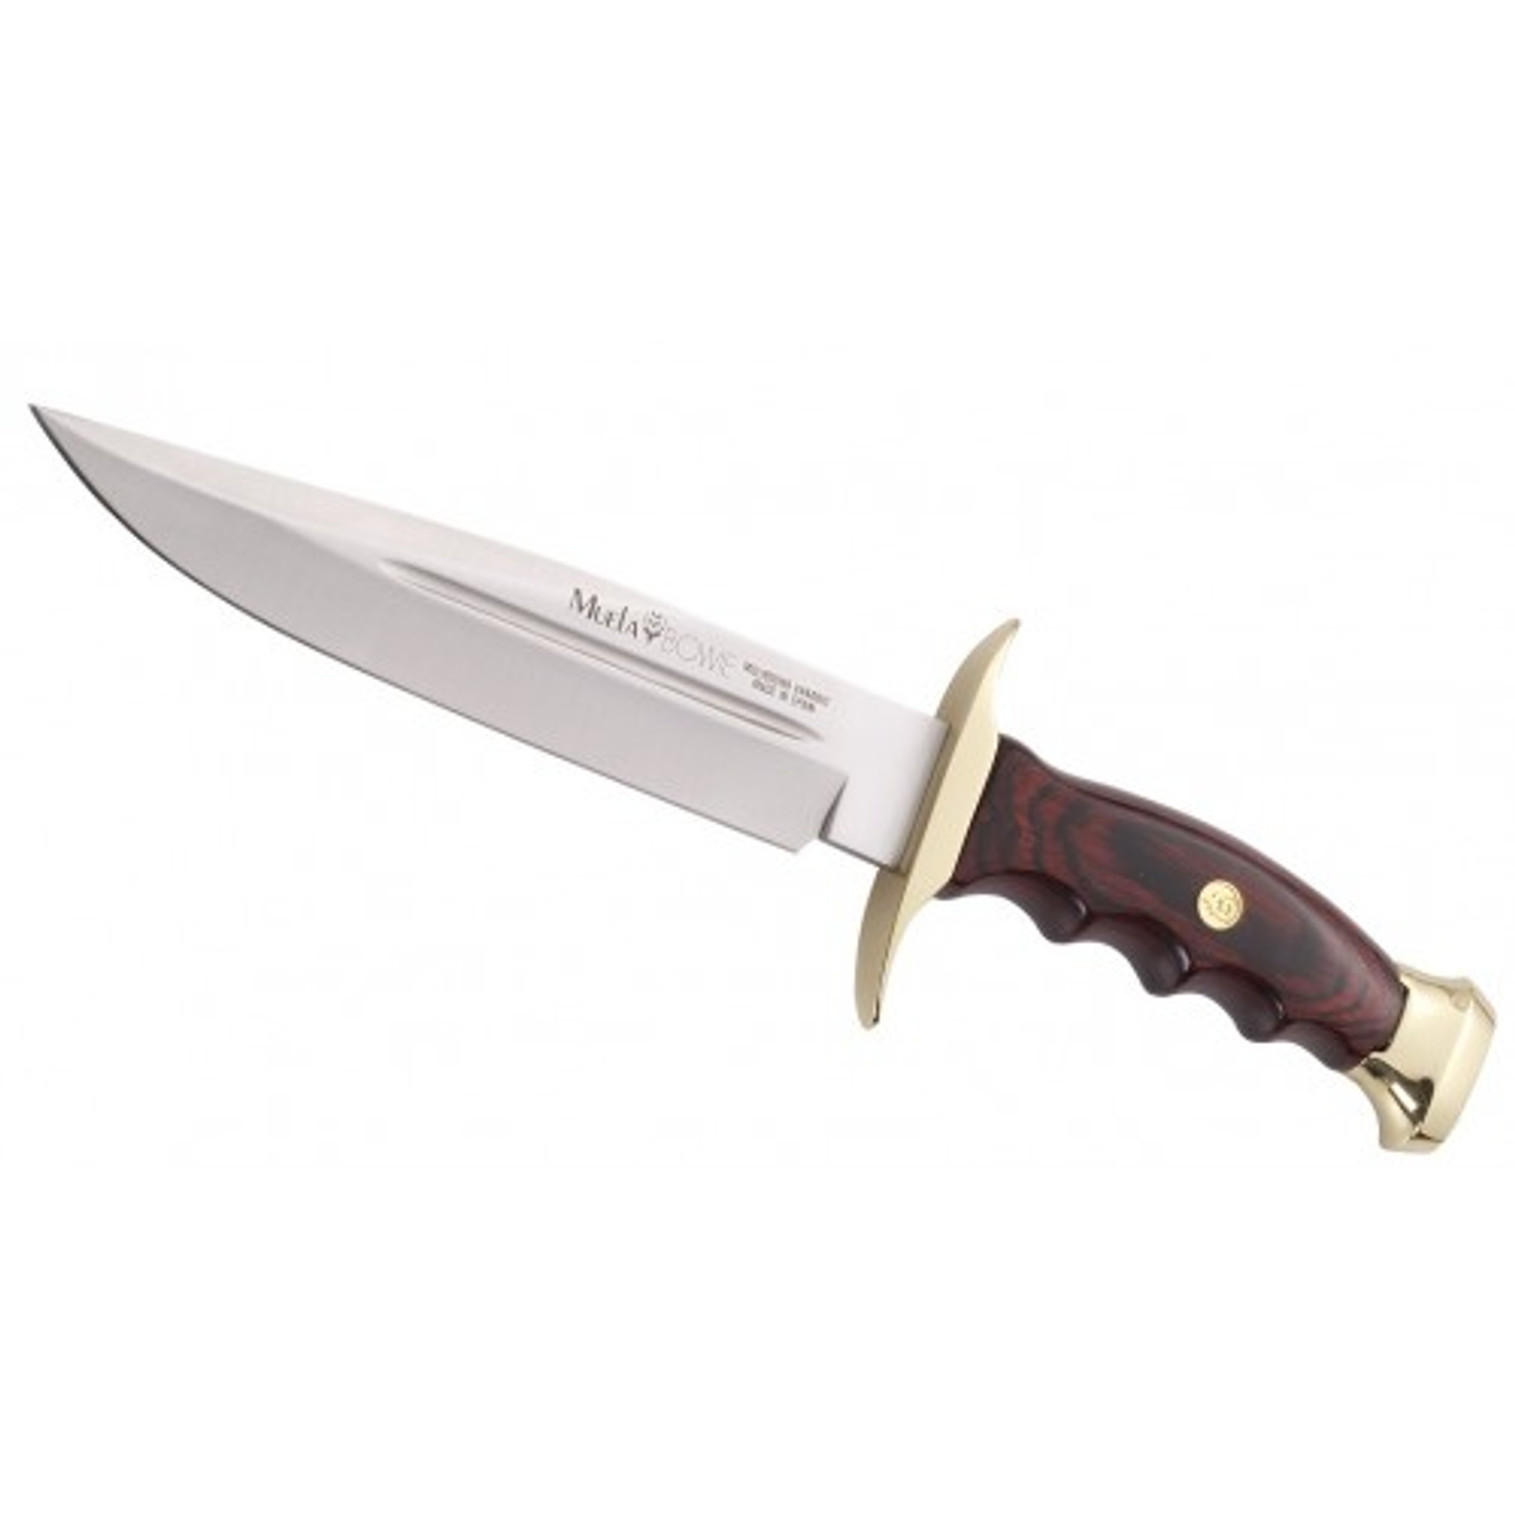 MUELA BW-18L, X50CrMoV15, 7-1/8" Fixed Bowie Blade Knife, Coral Pakkawood Handle